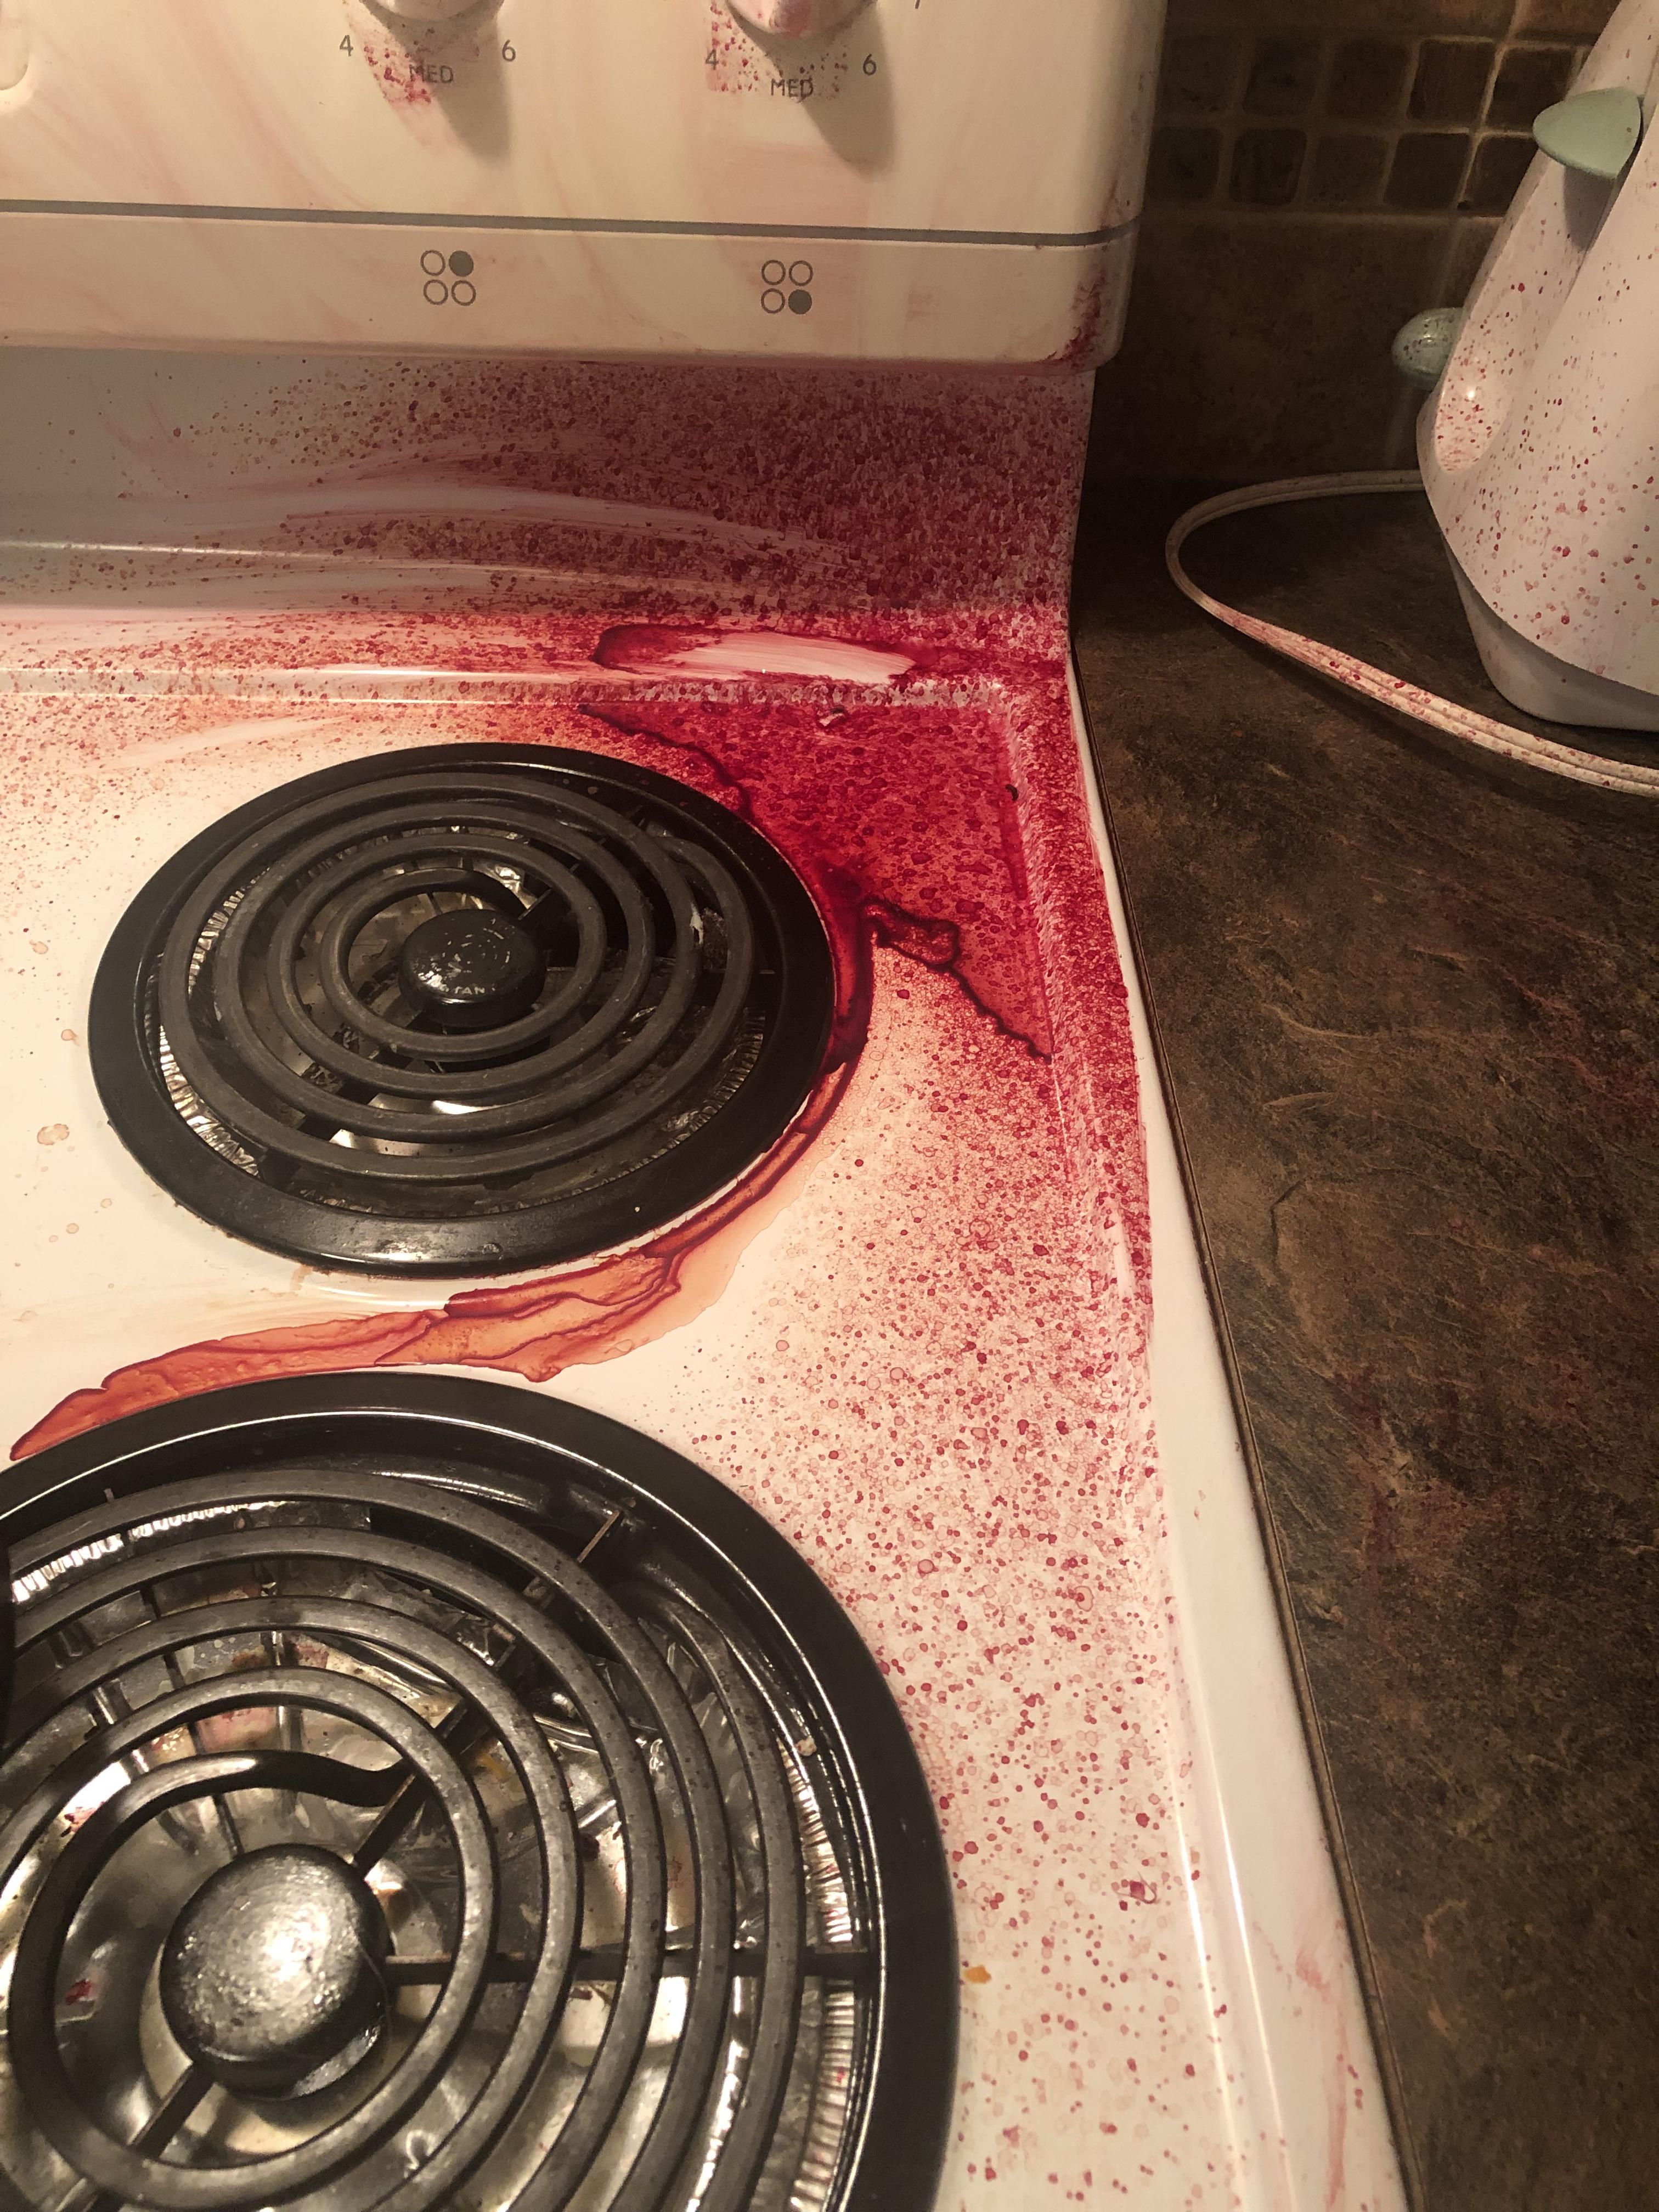 We made beets and it looks like we killed someone